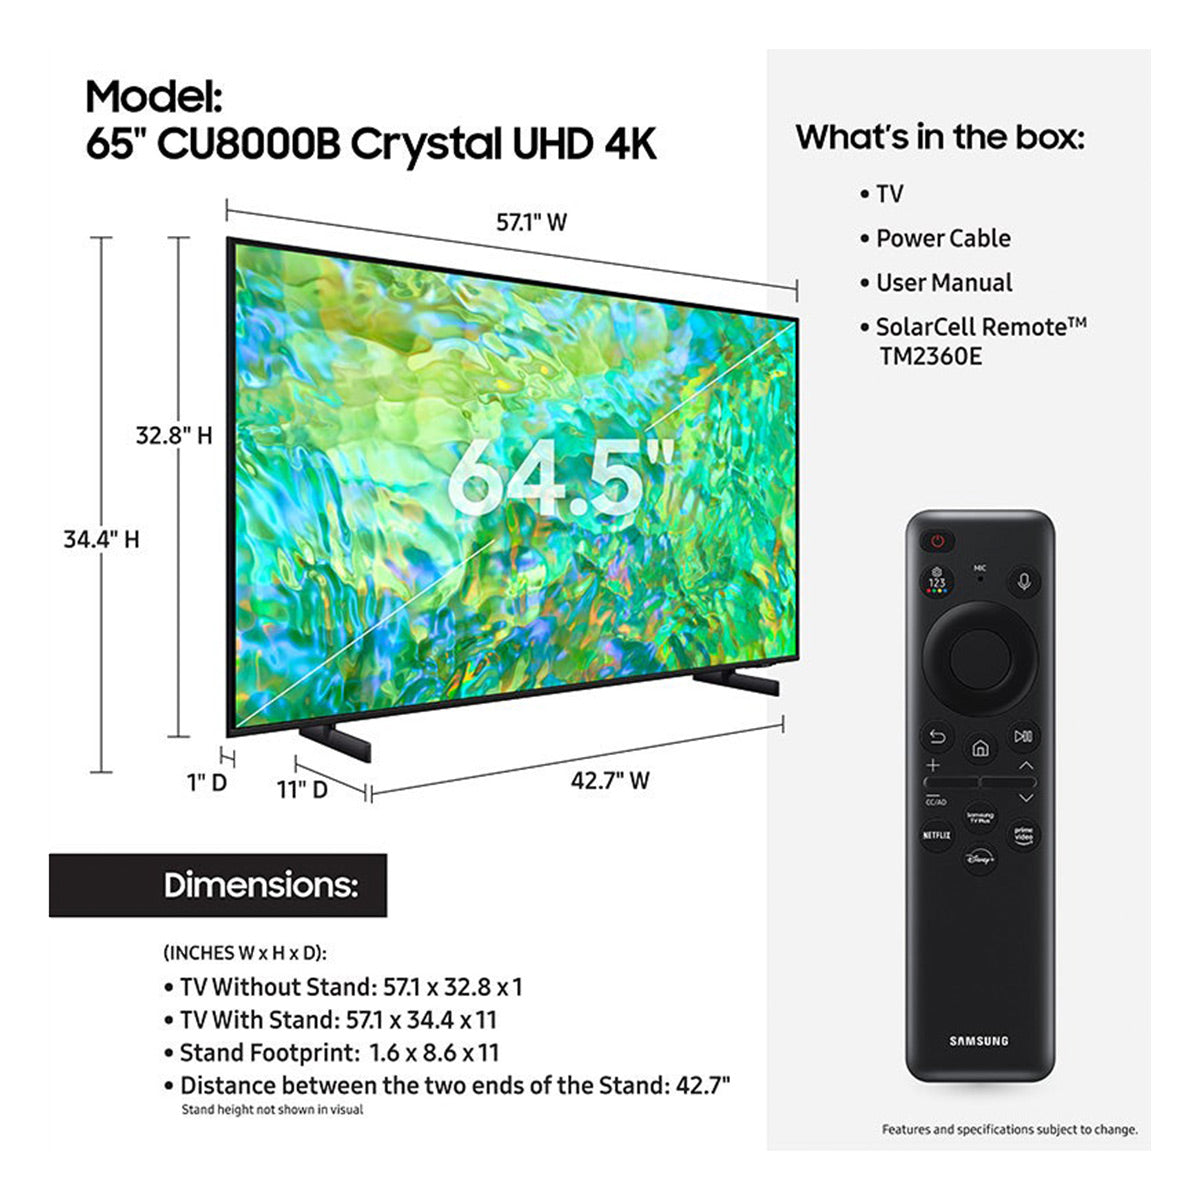 Samsung UN65CU8000 65" Crystal UHD 4K Smart TV with HDR, Object Tracking Sound Lite, & 4K Upscaling (2023)